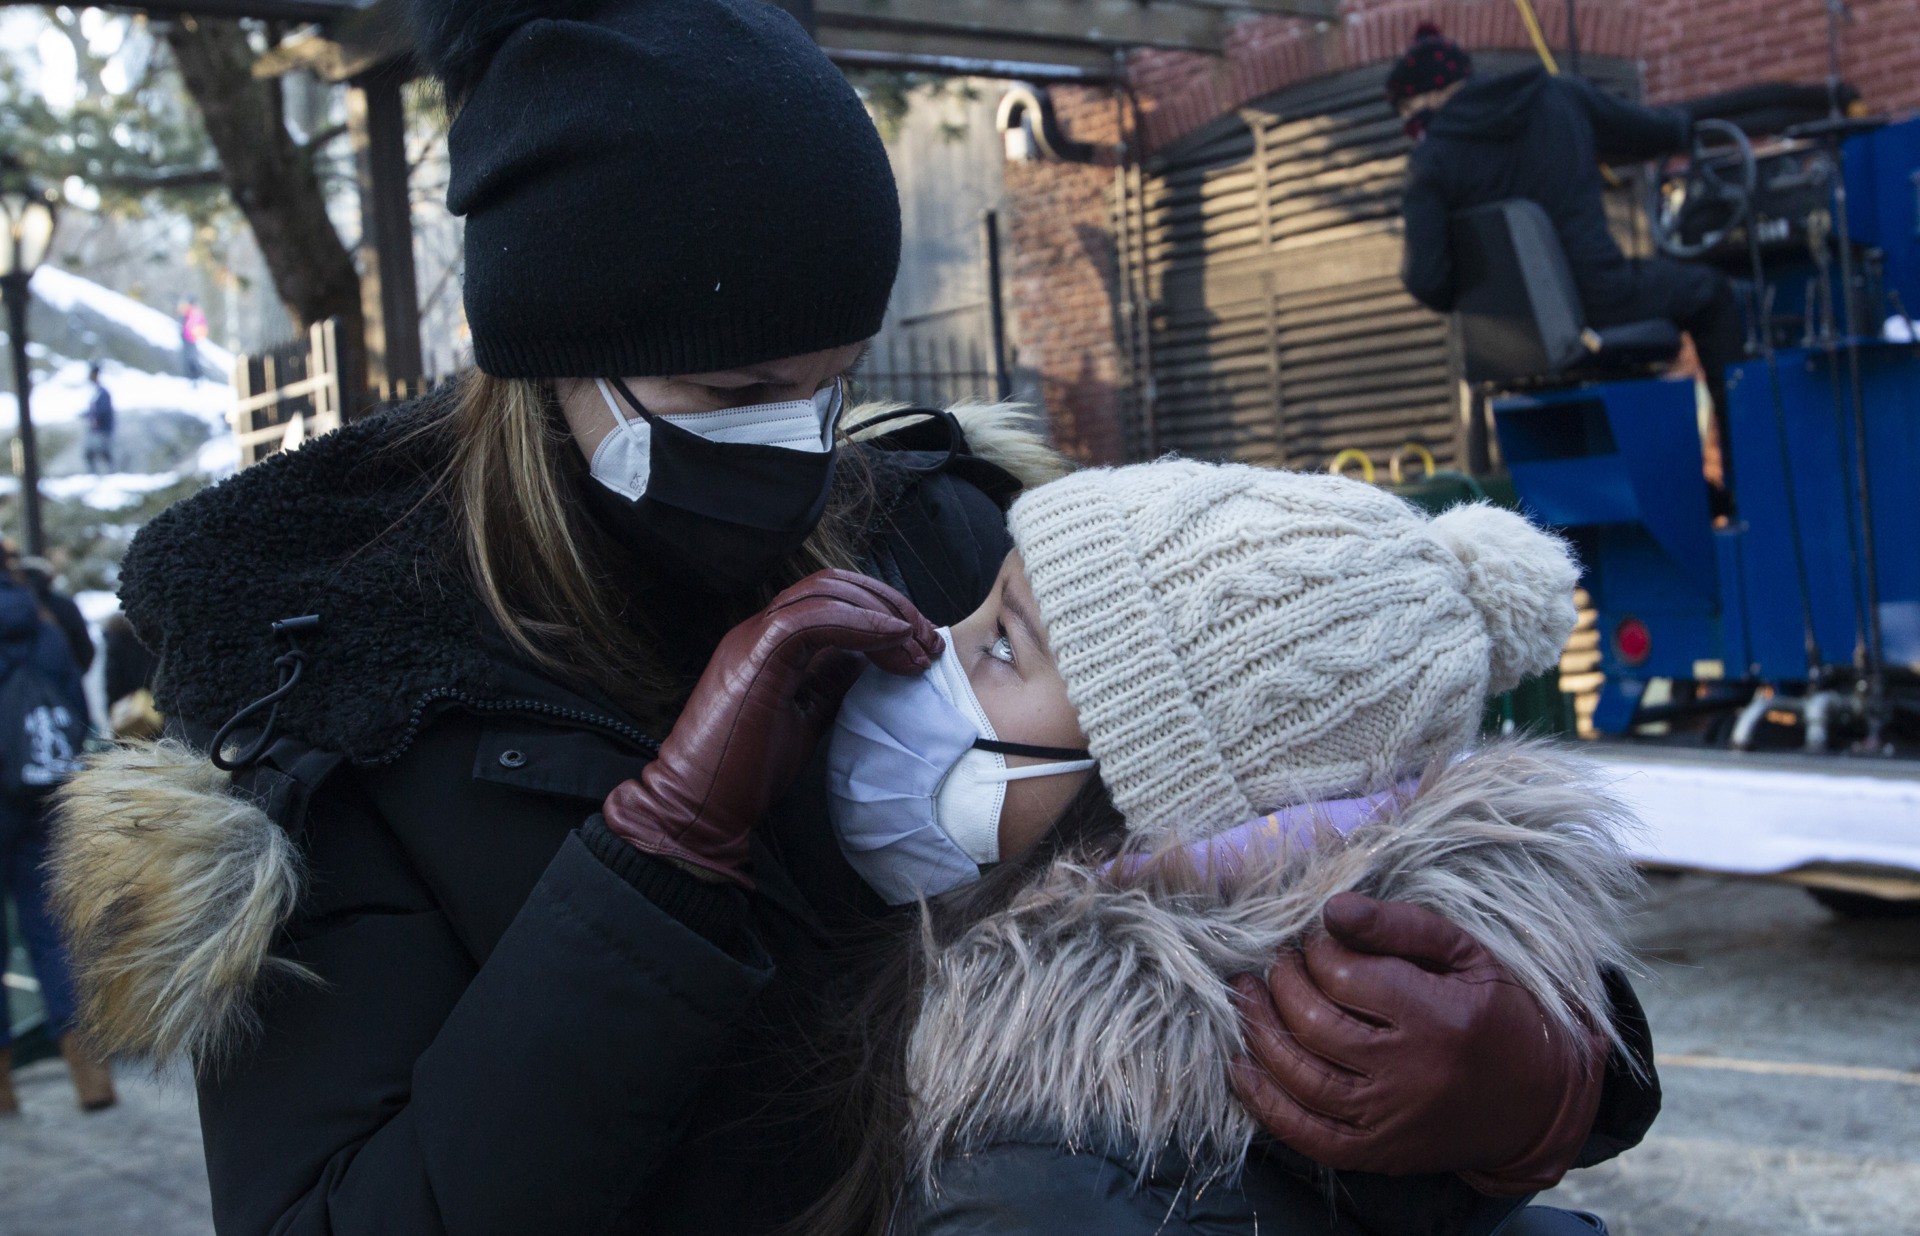 A woman adjusts a child's mask after they after they ice-skated on the last day at the Wollman ice skating rink now closed in Central Park New York on February 21, 2021. - The City of New York was to end today the contracts that allow the Trump Organization to manage several attractions such as the Wollman and Lasker Rinks, following the violent outburst of violence at the U.S. Capitol, but after New Yorkers complained about the closure of a safe outdoor exercise facility during the pandemic, mayor Bill De Blasio issued this statement: New York City kids deserve all the time on the ice they can get this year, the Wollman and Lasker rinks will stay open under current management for the few weeks left in this season. But make no mistake, we will not be doing business with the Trump Organization going forward. Inciting an insurrection will never be forgotten or forgiven. (Photo by Kena Betancur / AFP) (Photo by KENA BETANCUR/AFP via Getty Images)